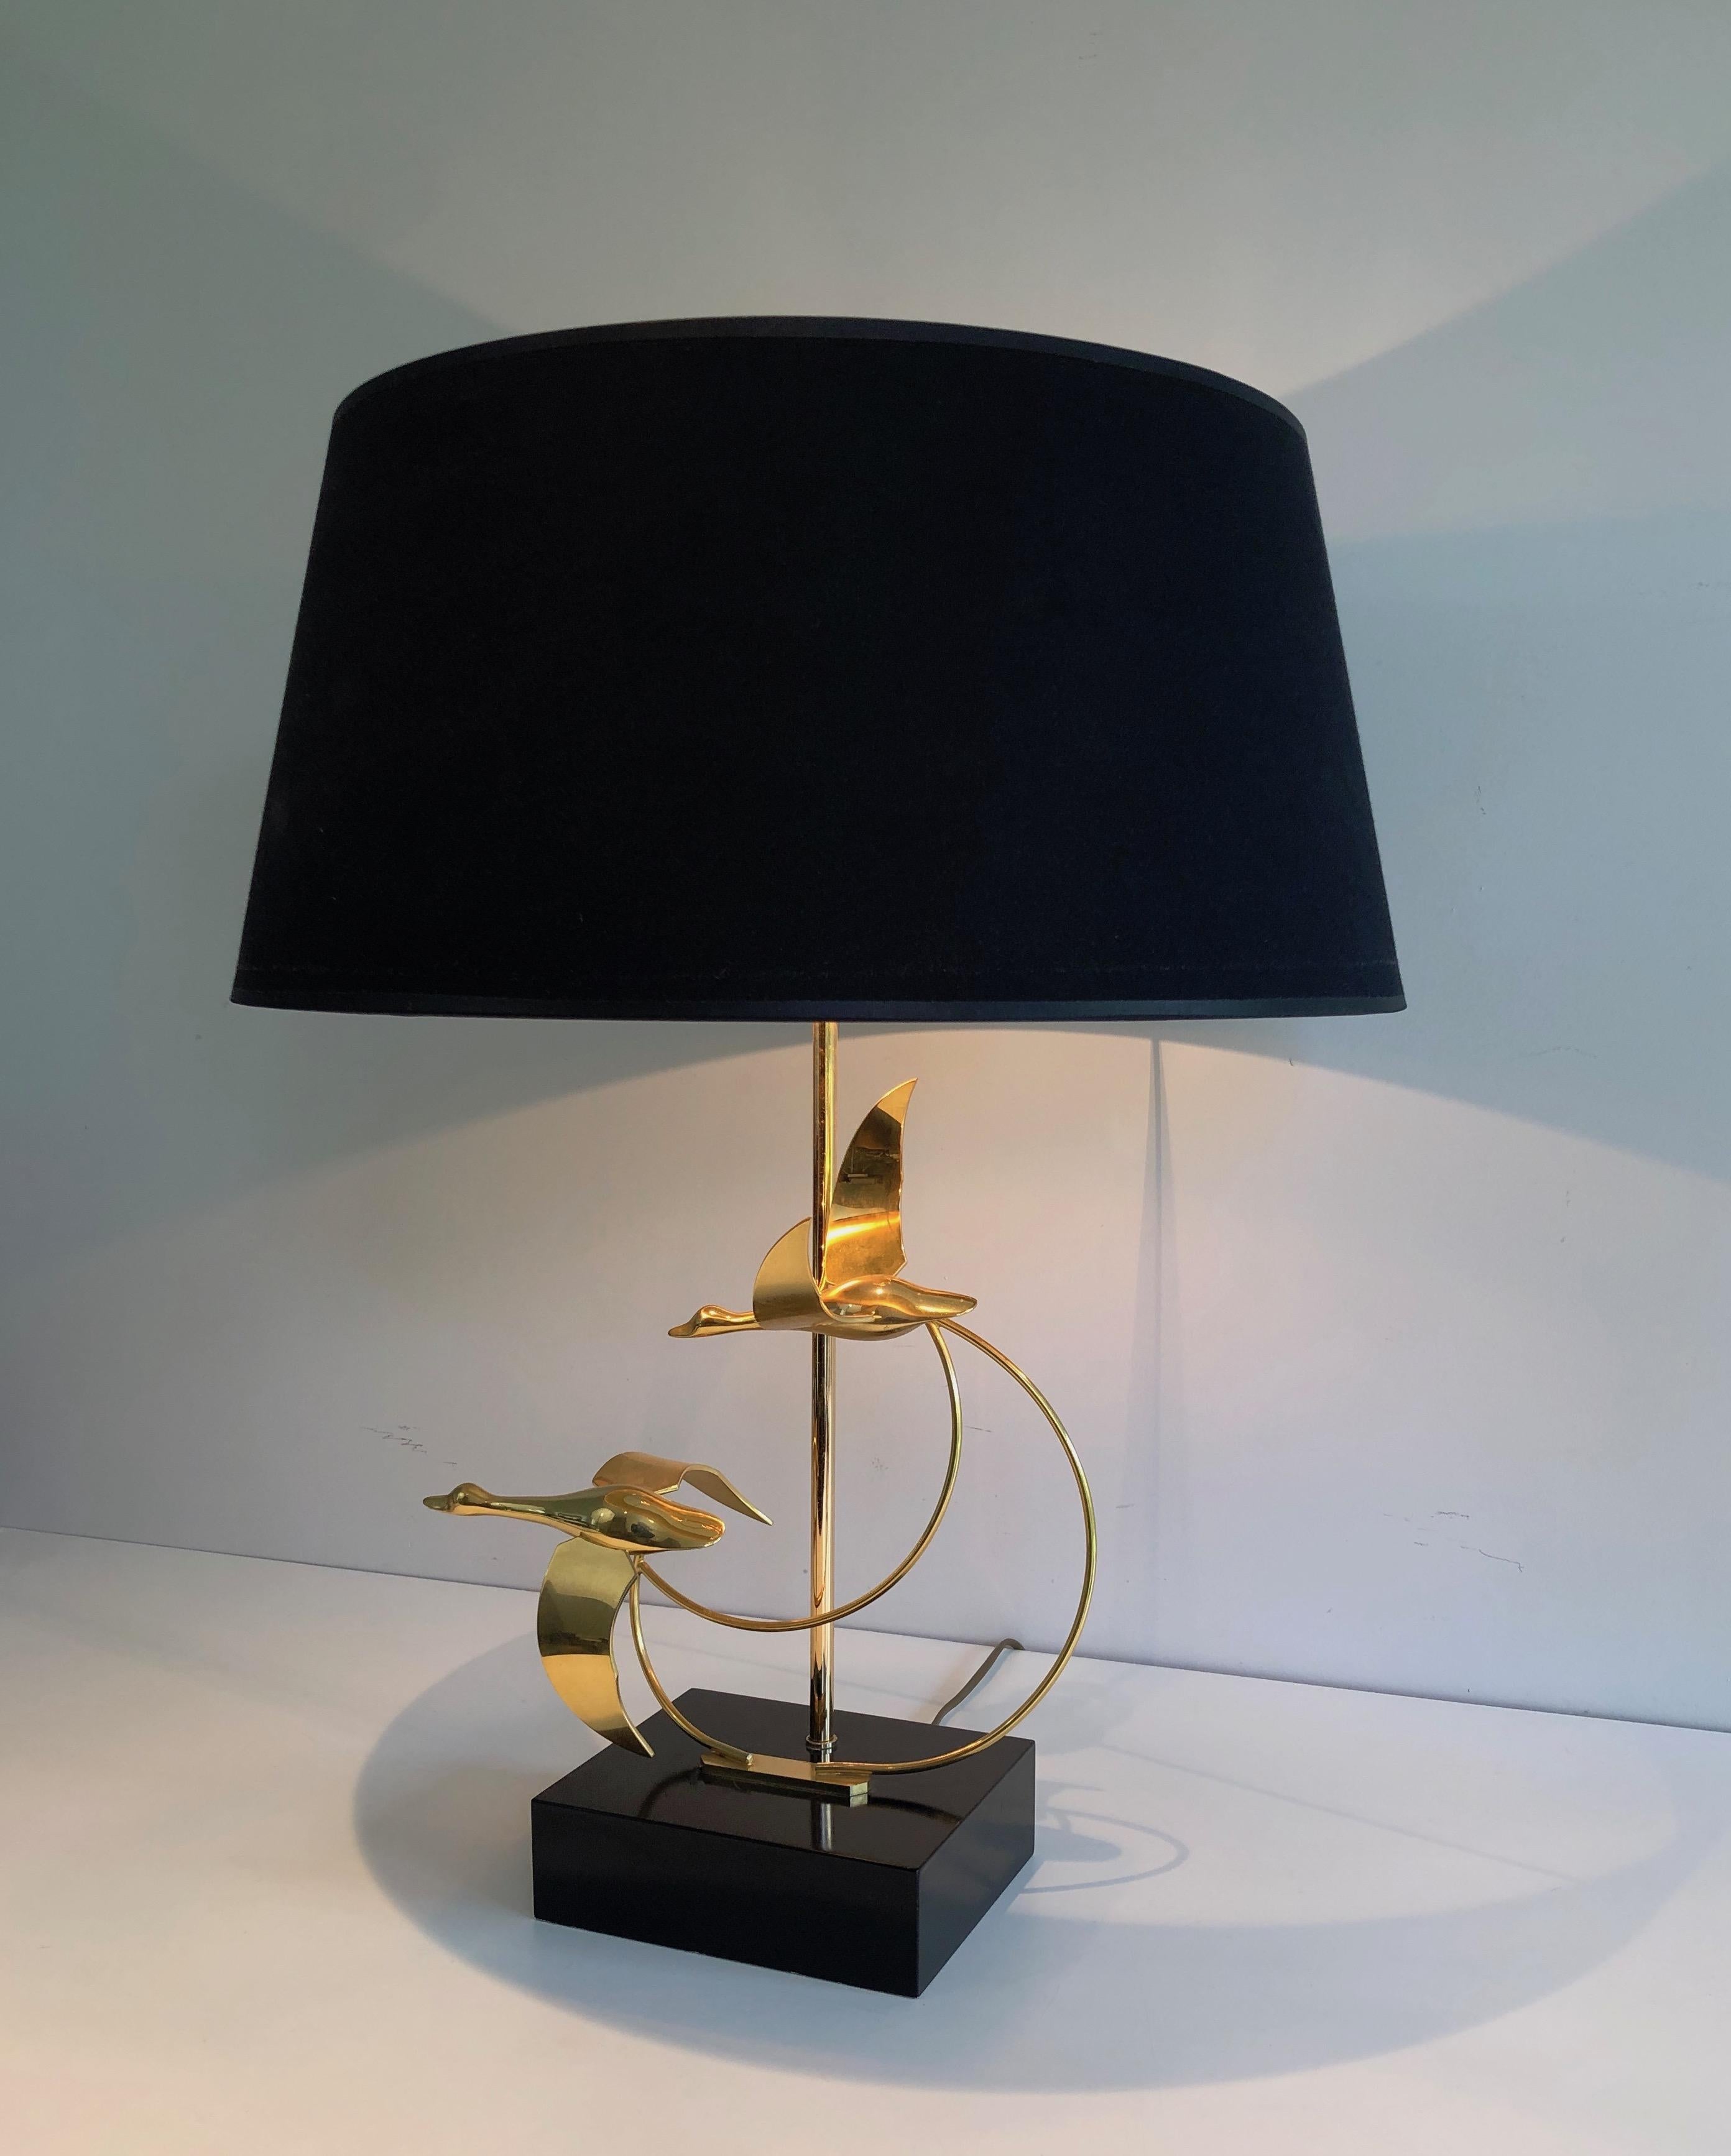 Flock of Wild Geese Brass Table Lamp, French, circa 1970 For Sale 8